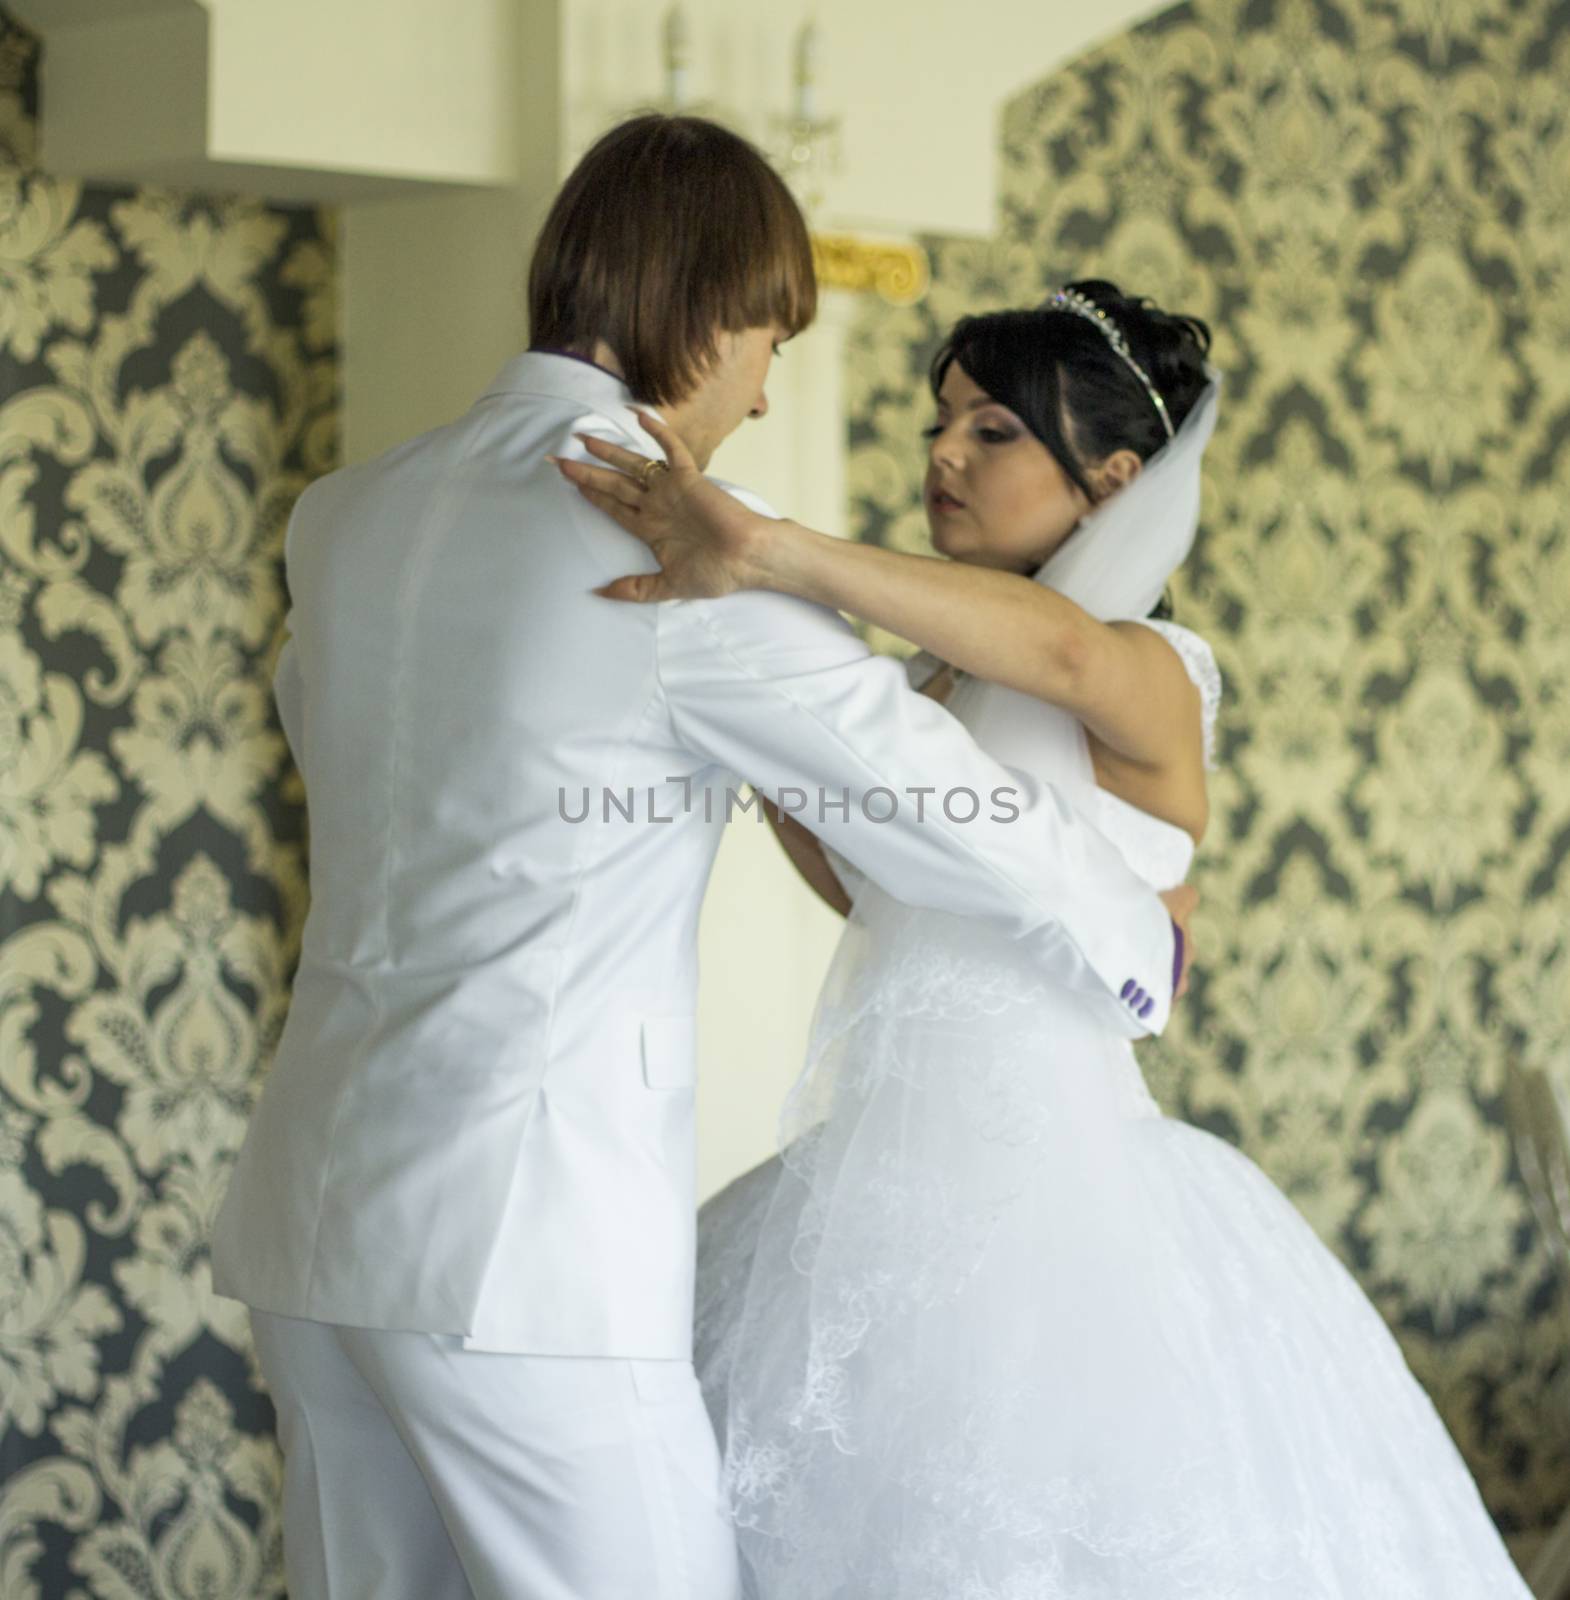 Bride and groom dancing the first dance at their wedding day. For your commercial and editorial use